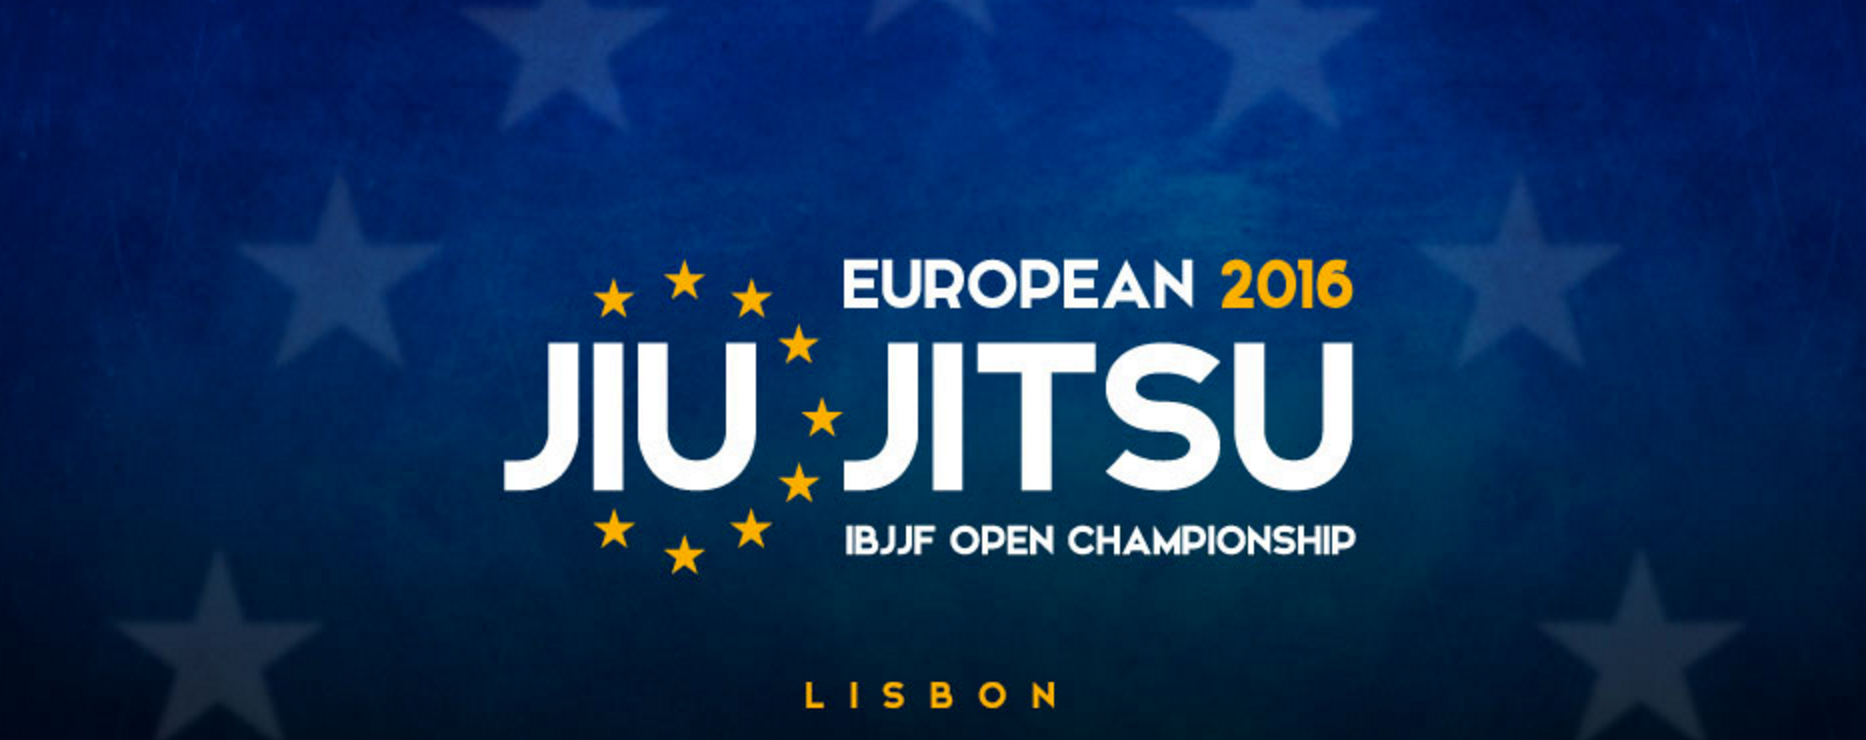 2016 Europeans Break Record Once Again: Biggest BJJ Competition on Earth!